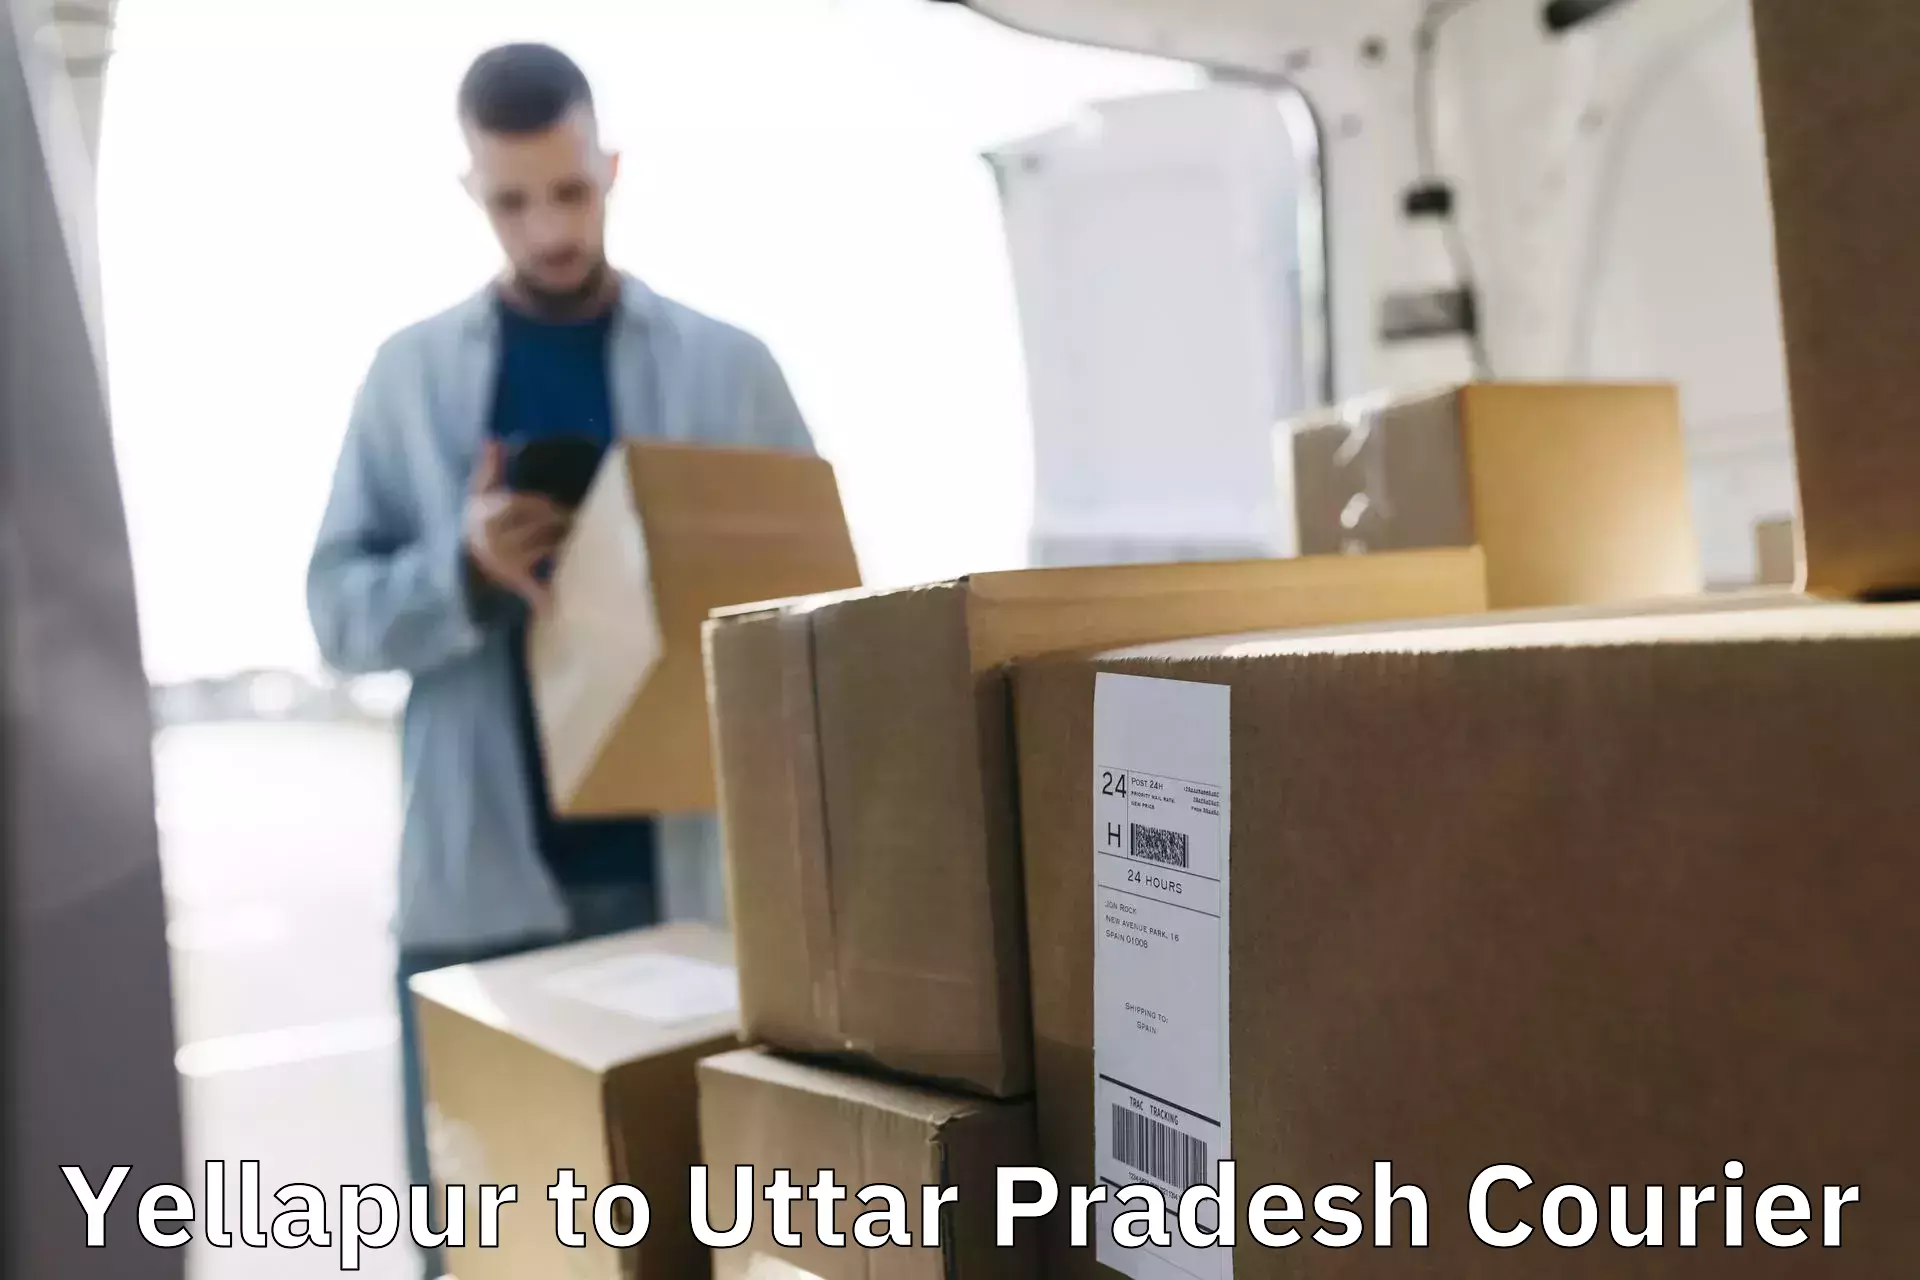 Efficient shipping operations Yellapur to Lucknow